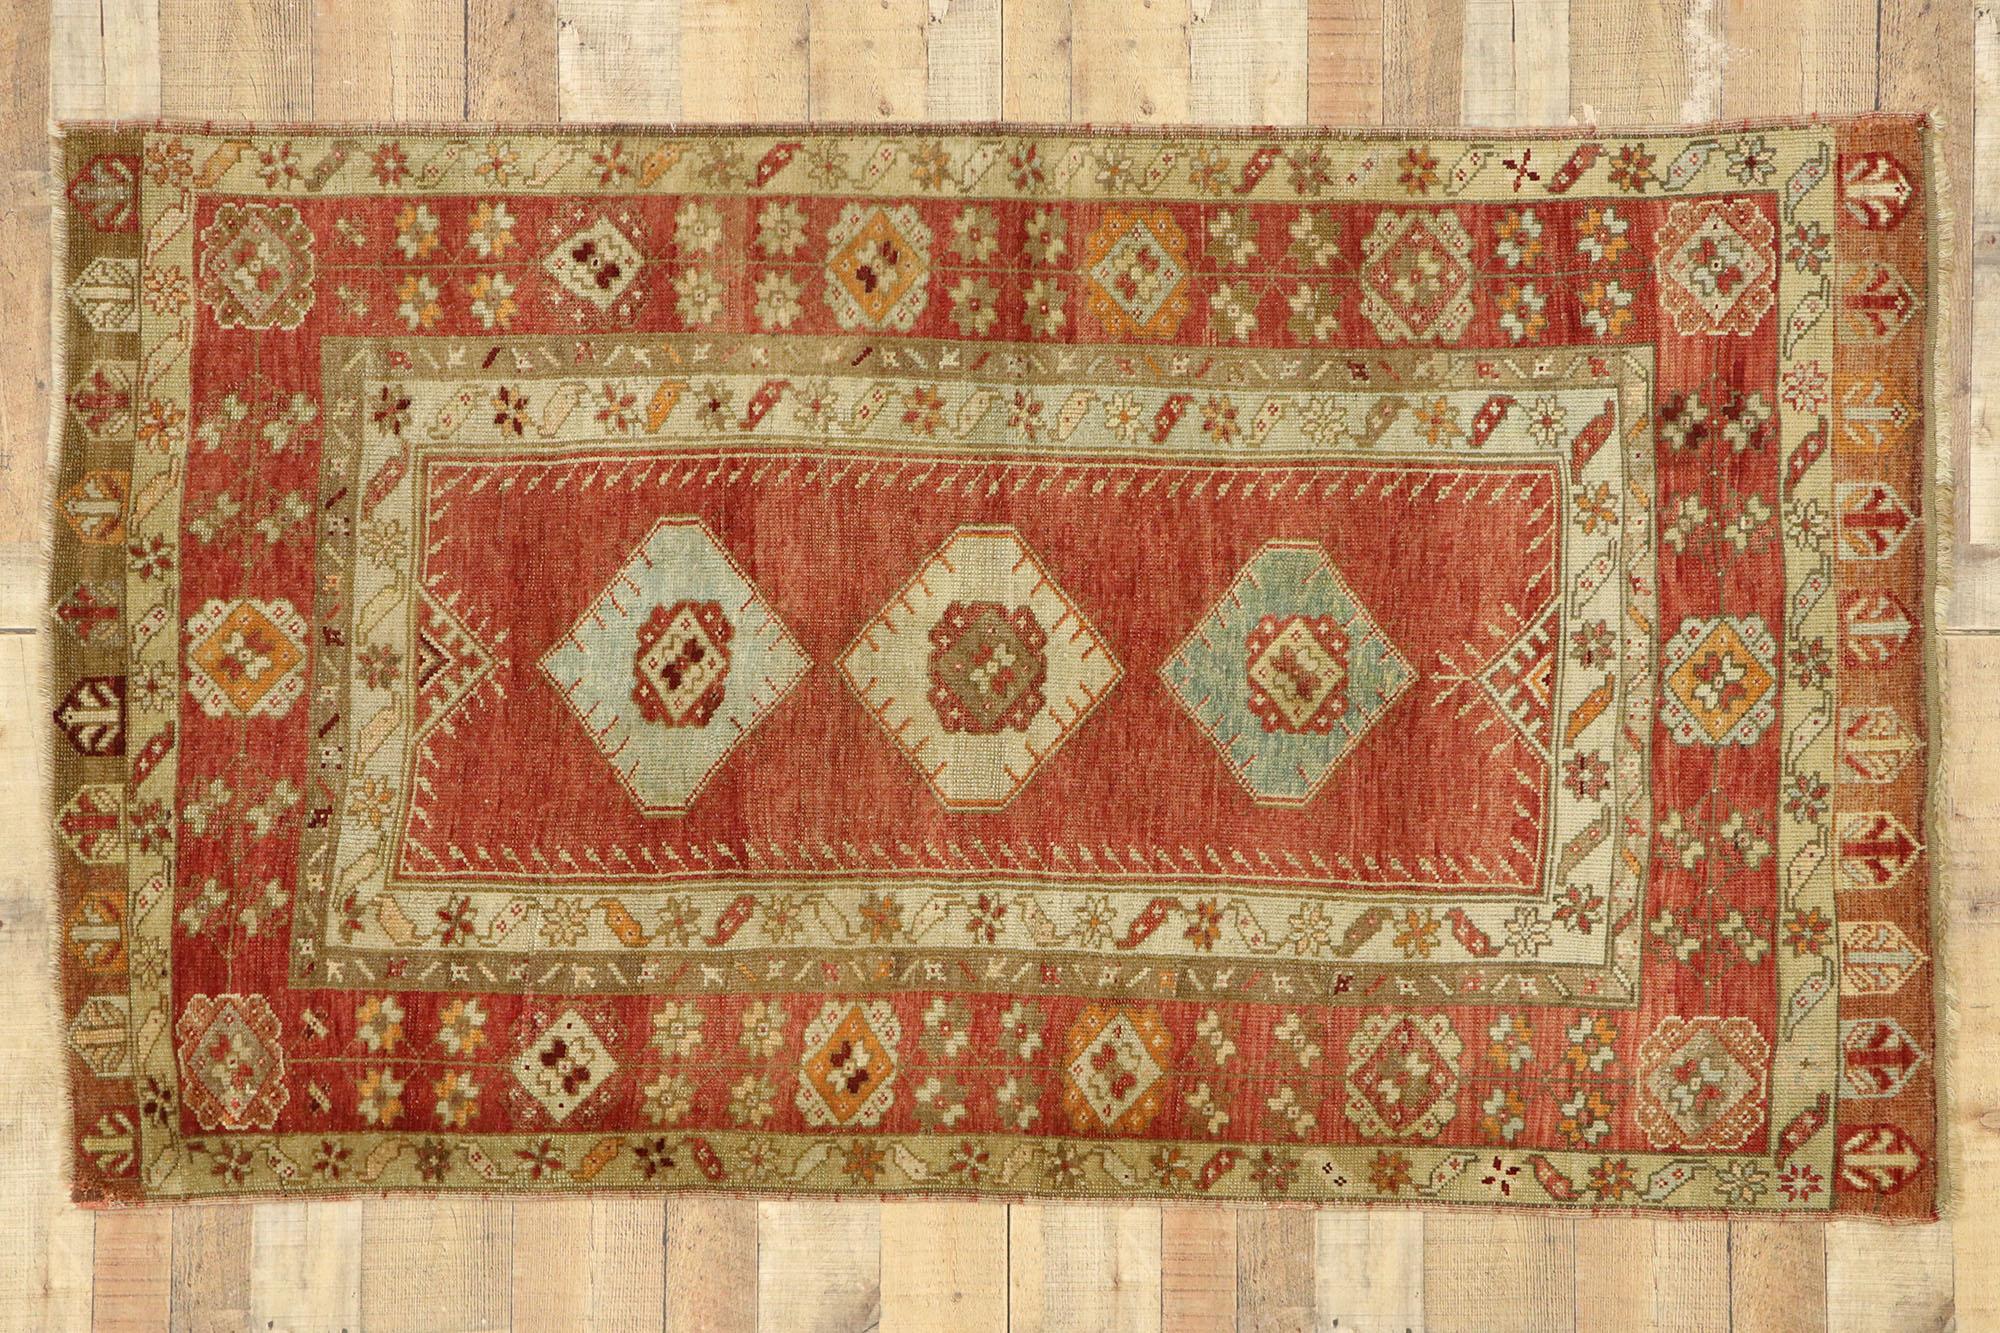 Vintage Turkish Oushak Rug with Rustic Artisan Spanish Colonial Style 2